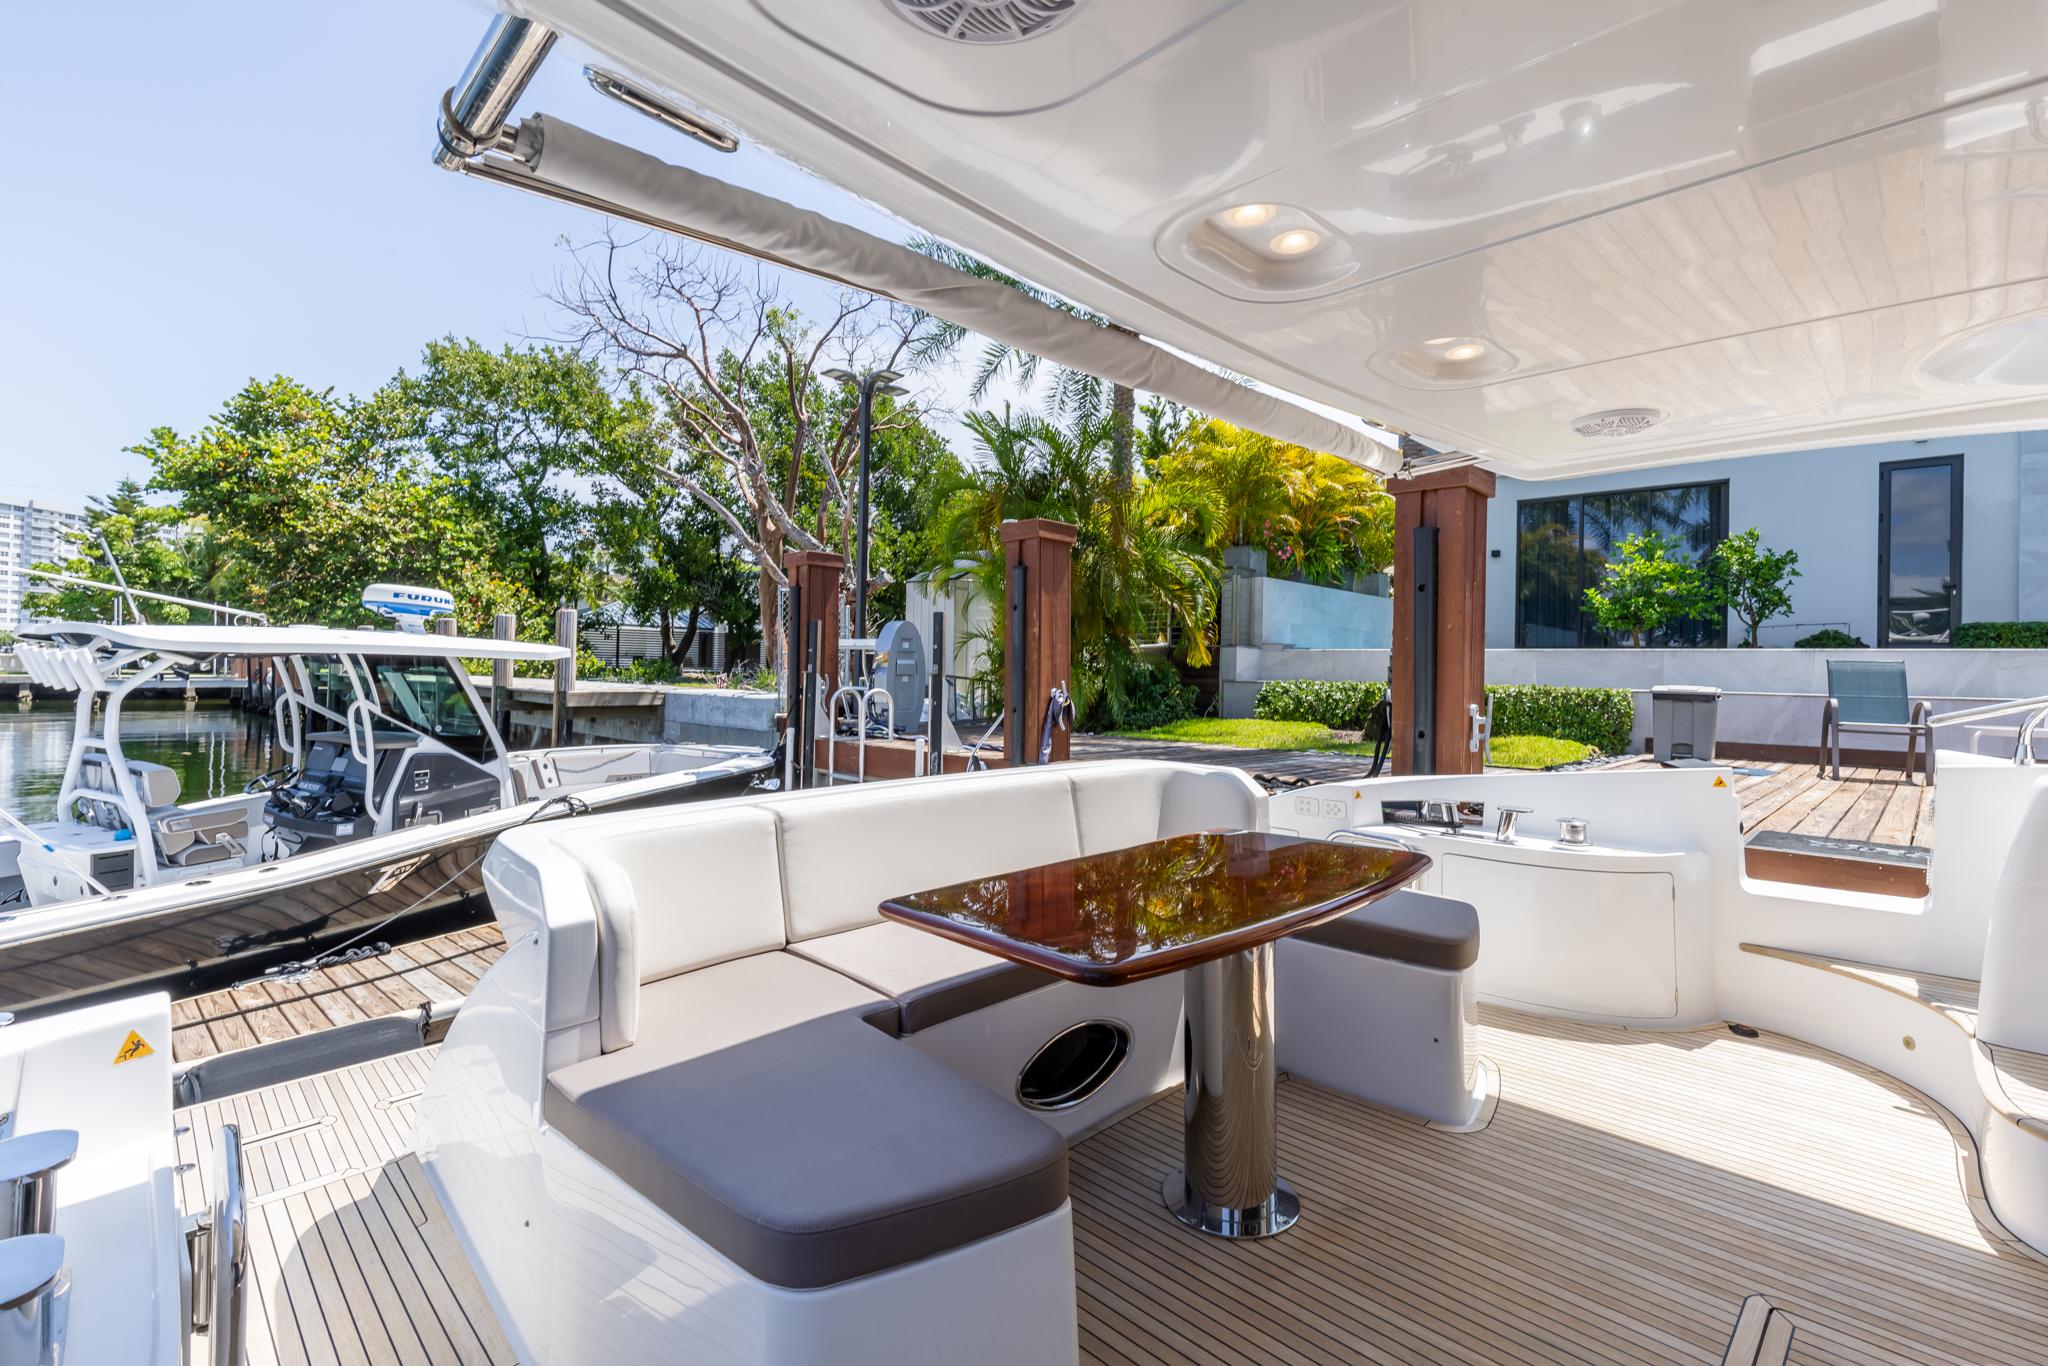 Azimut 64 Jeneli - Aft Deck, Seating and Table